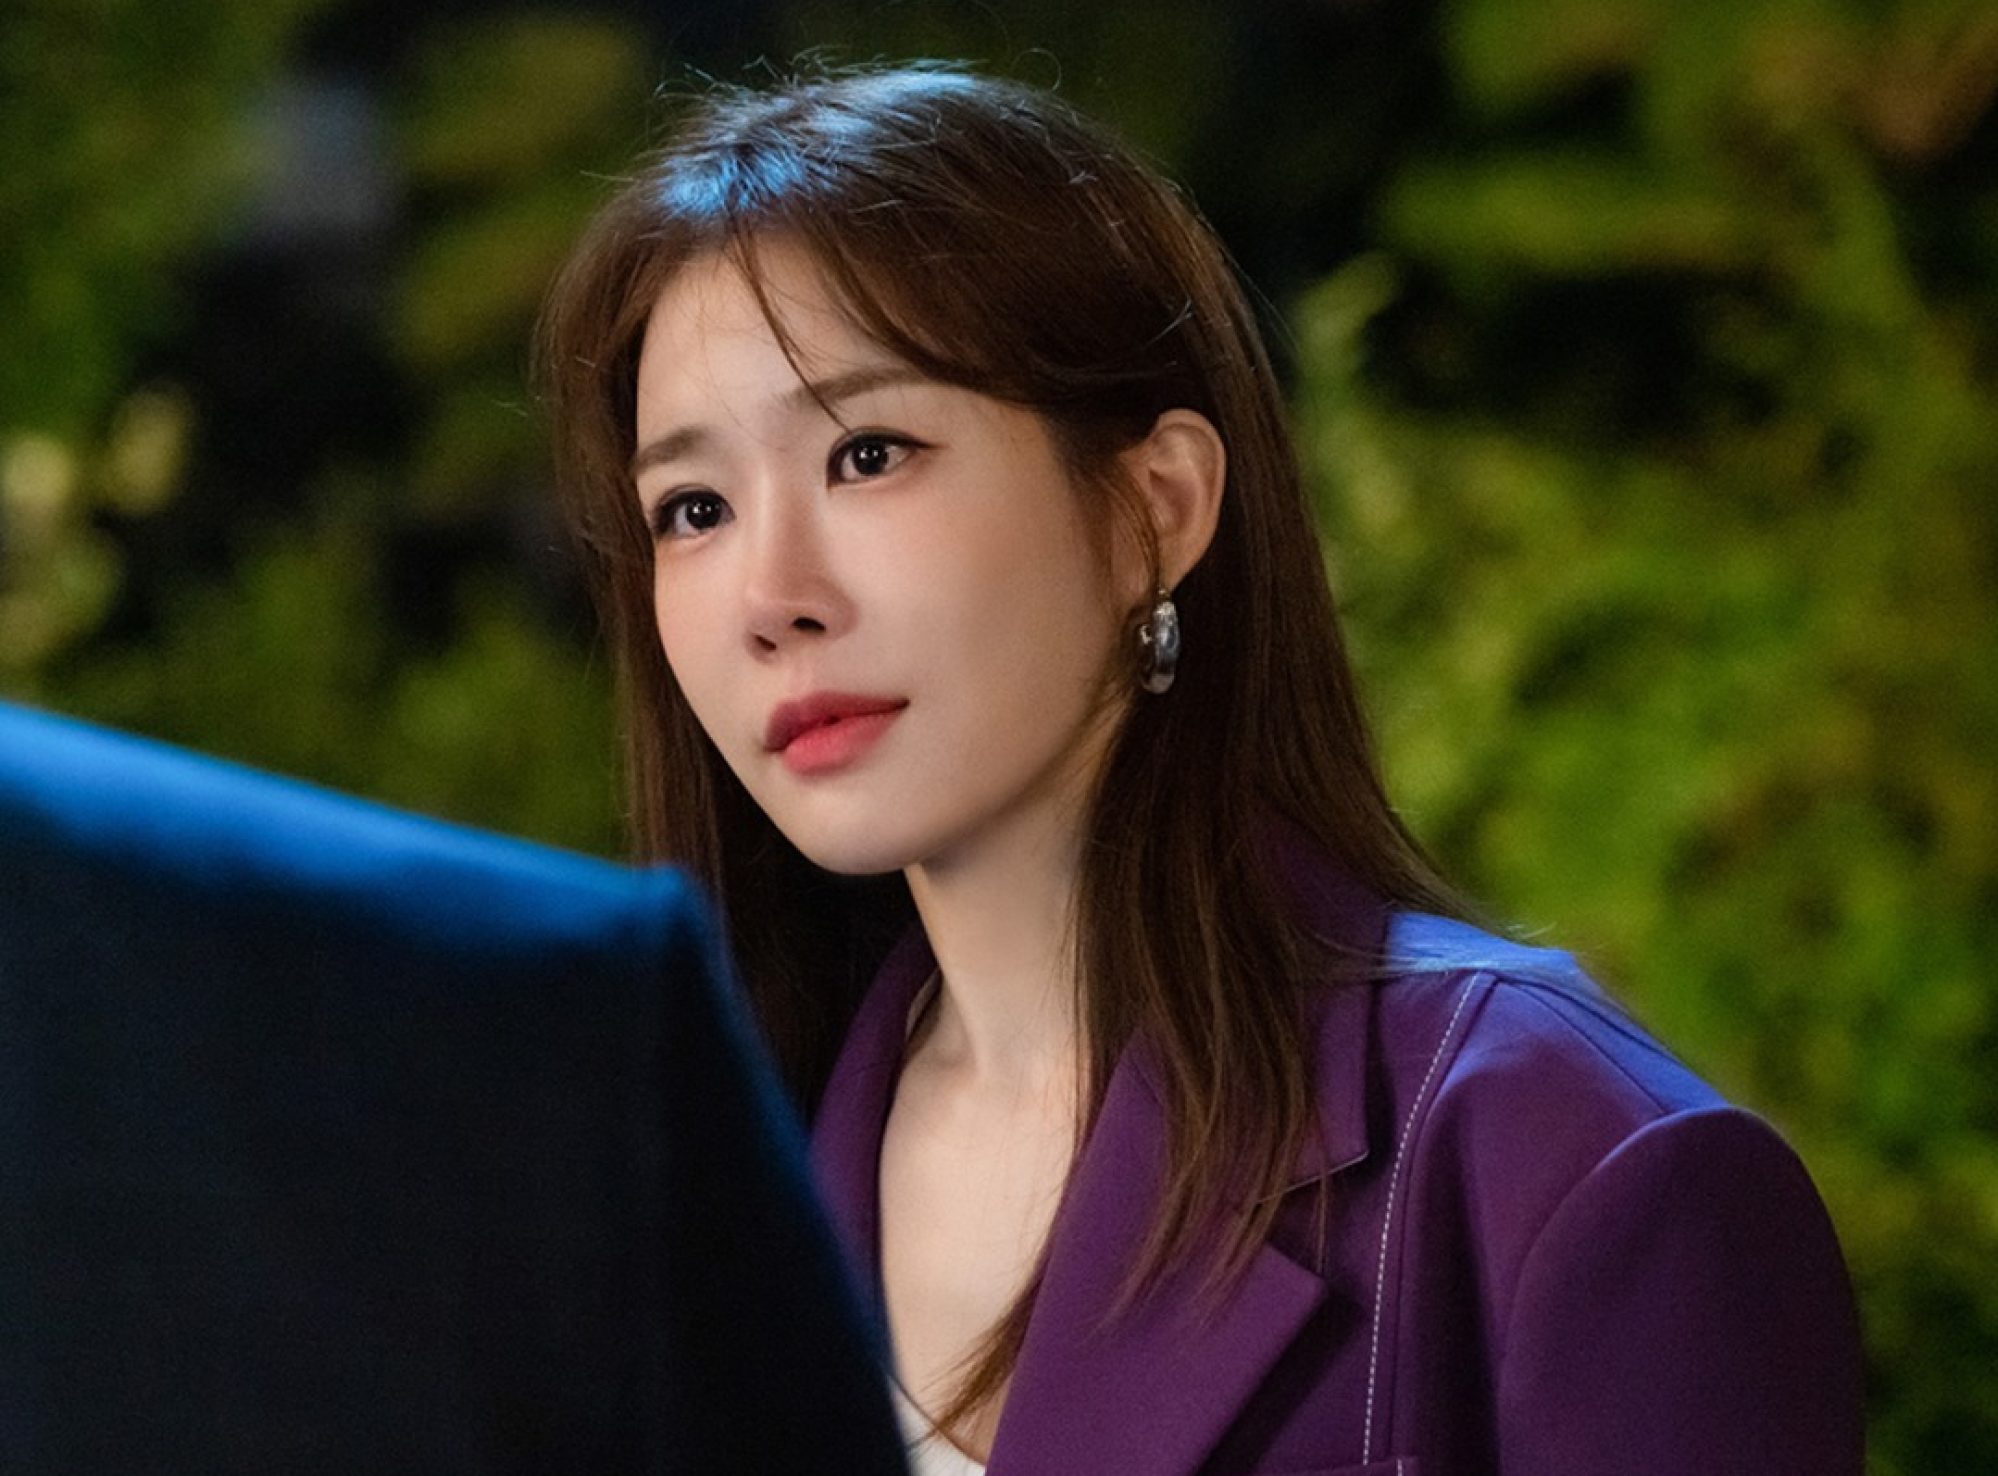 Prime K-drama True to Love stuns overseas viewers with